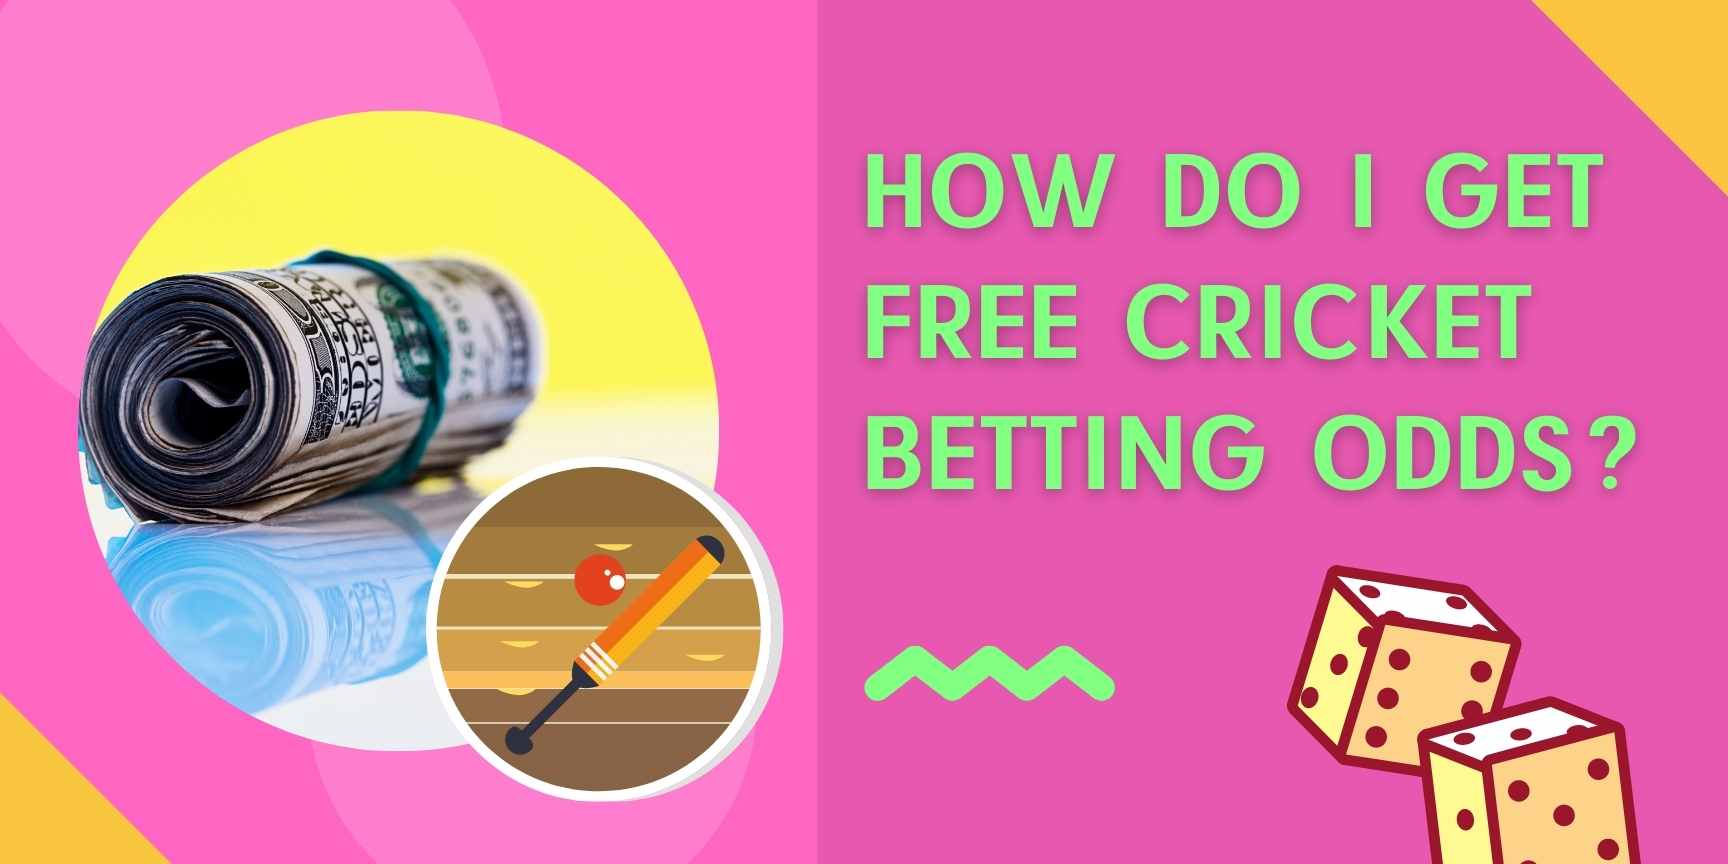 How do I get free cricket betting odds?